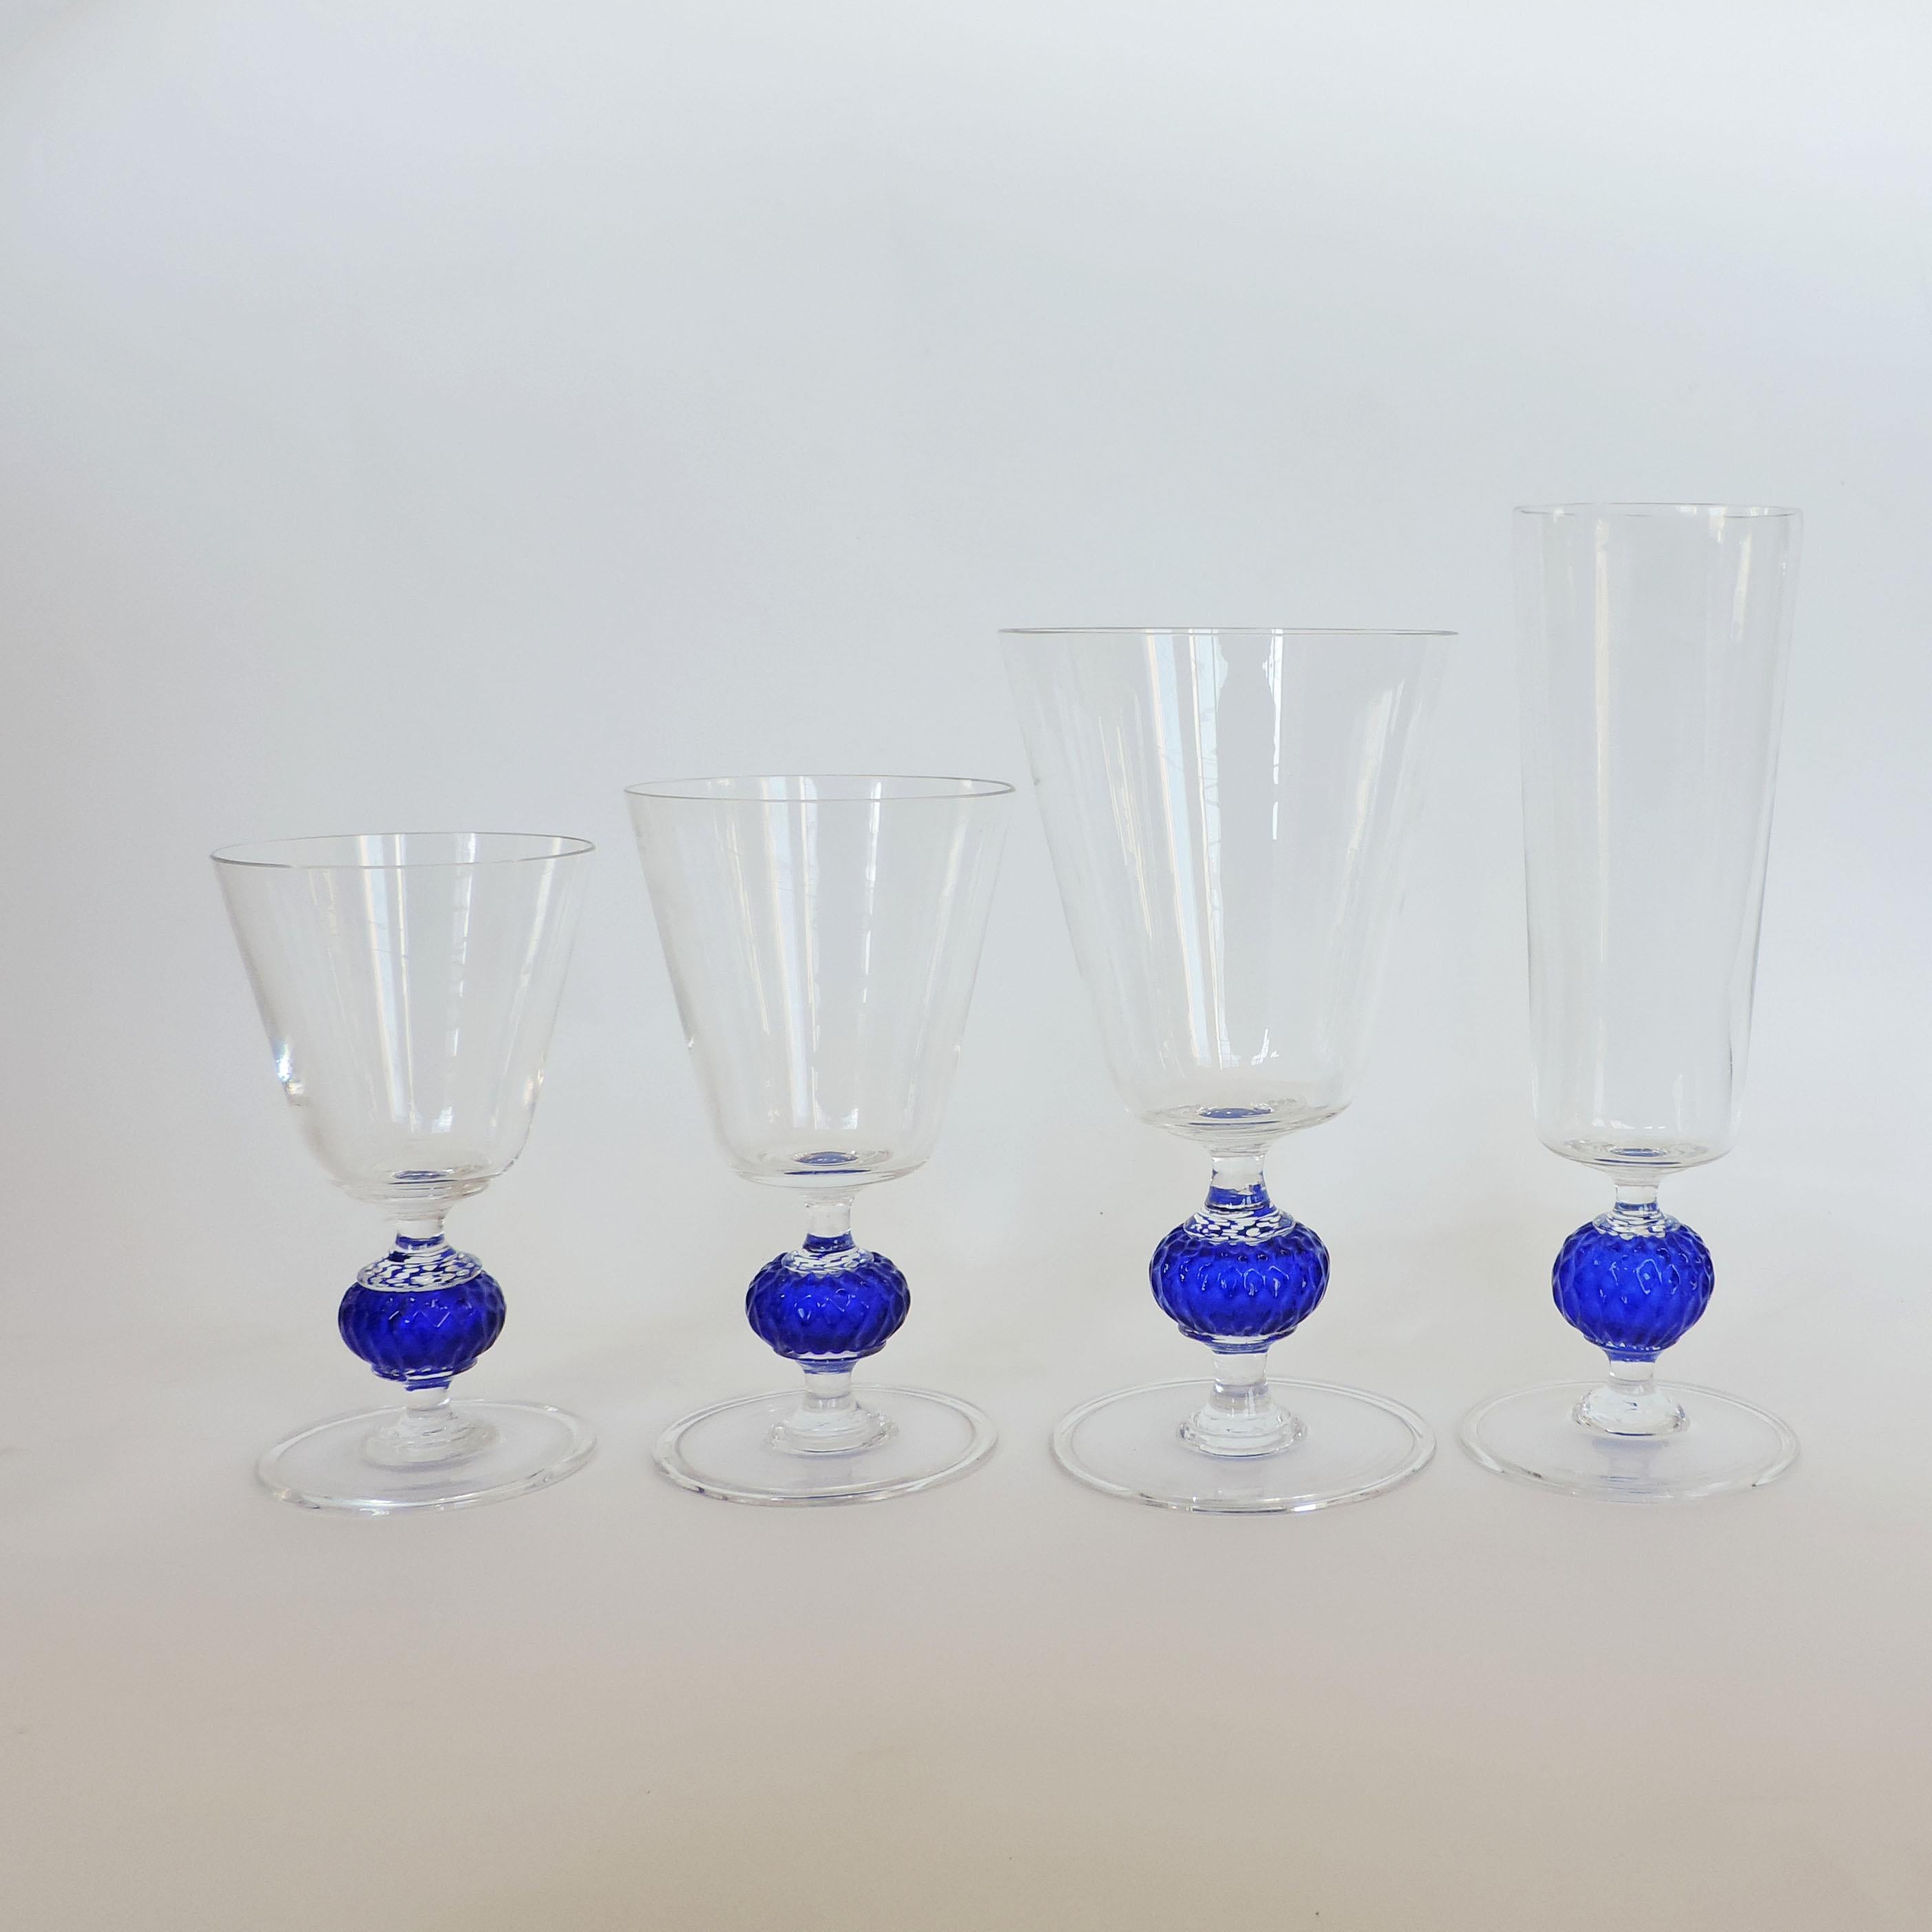 Italian 1950s hand blown Murano glass set of 40 drinking glasses.
10 Pieces per shape
Transparent and Blue glass.

